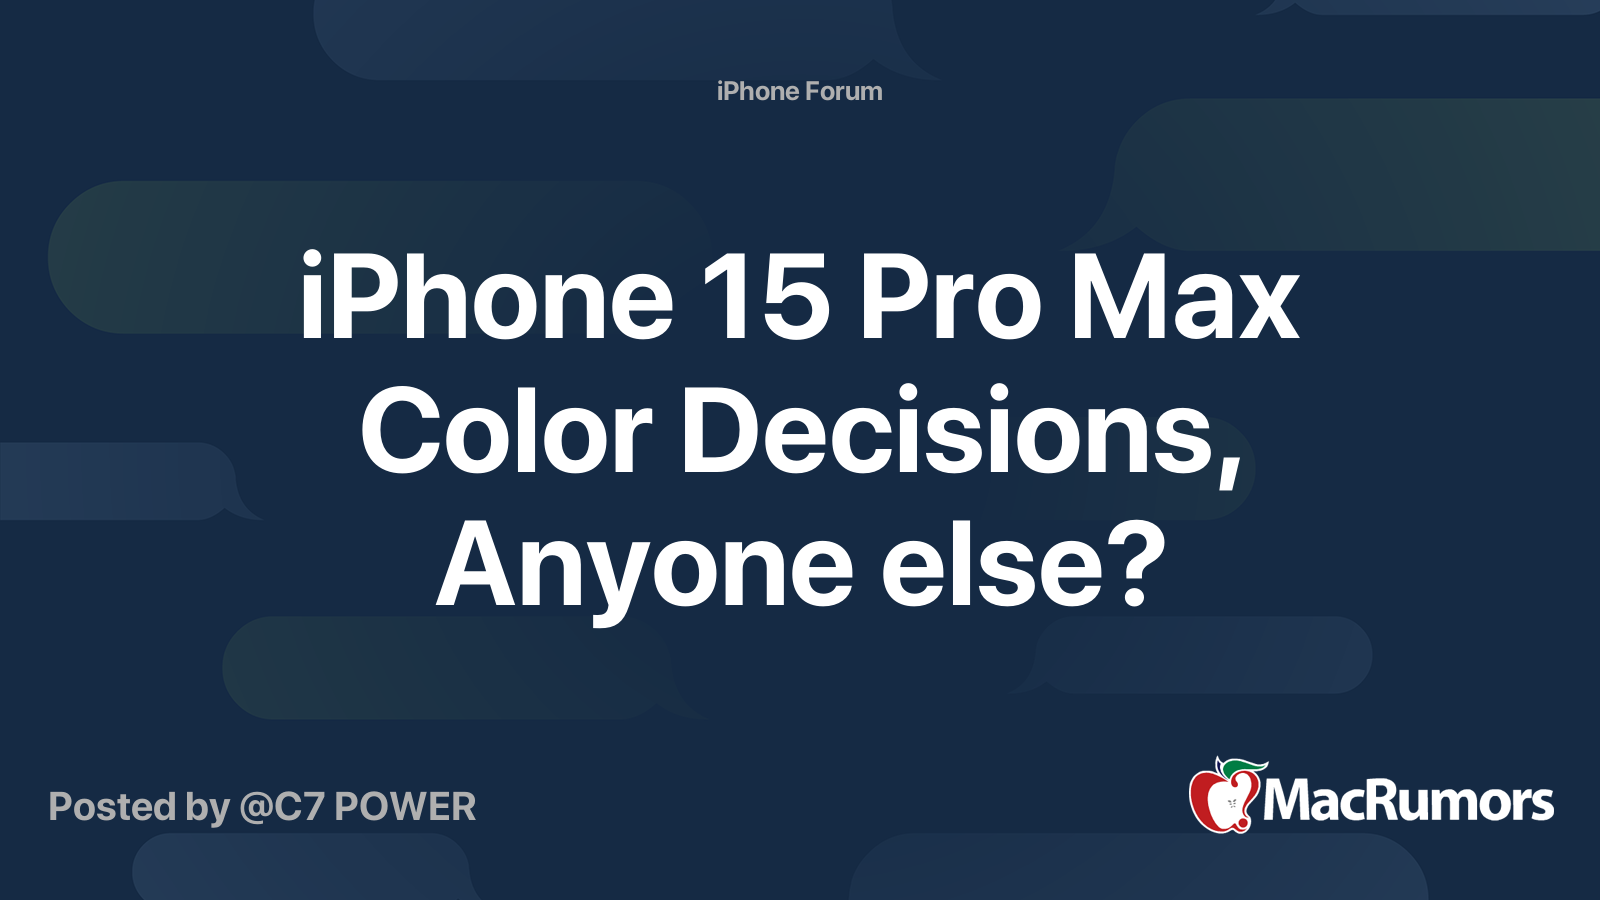 Choosing the color of my iPhone 15 Pro Max was one of the most difficult  decisions I've had to make this year!